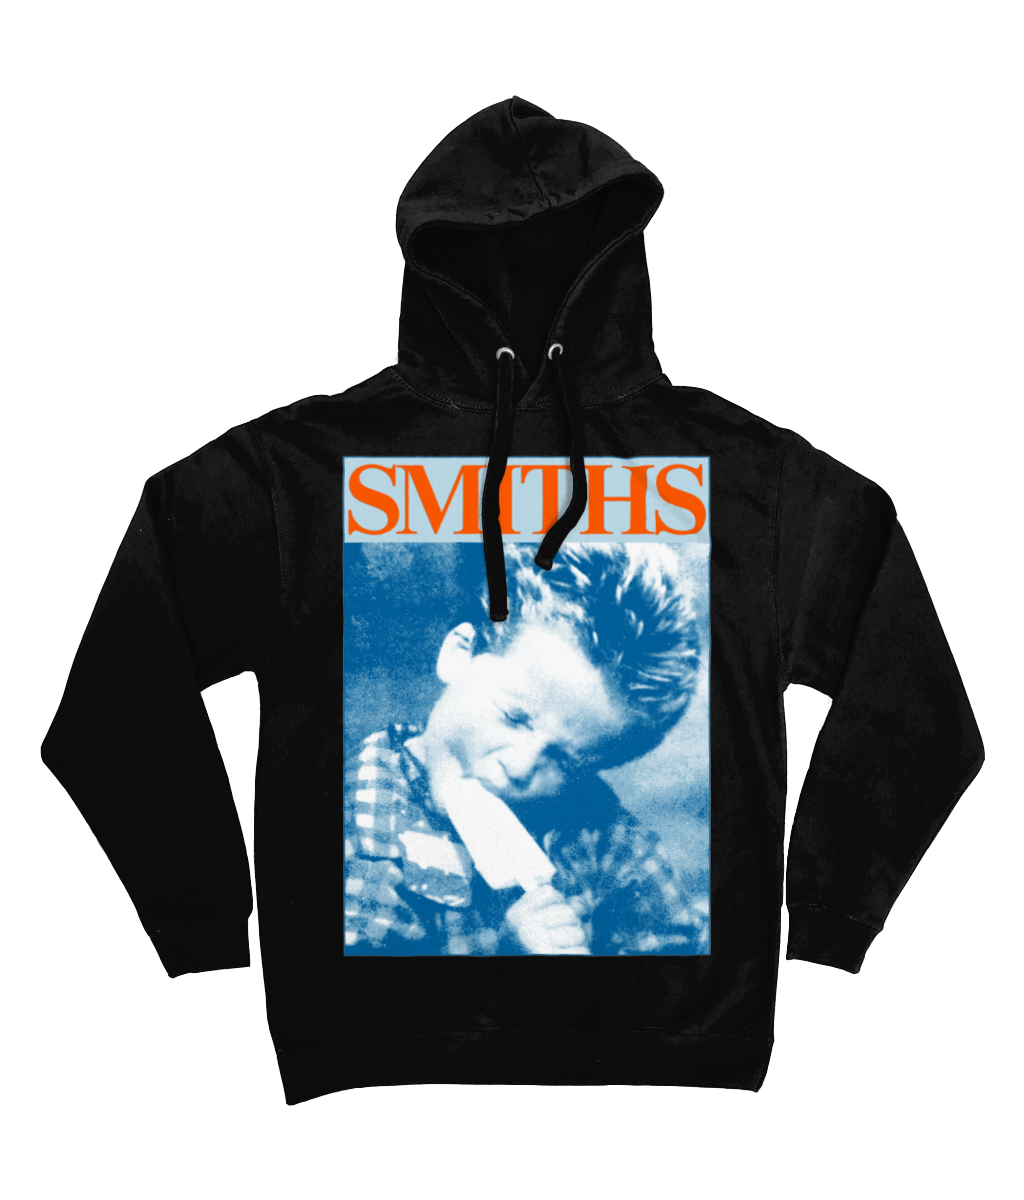 THE SMITHS - 'Boy With Lolly' - 1986 - Blue & Red - Hoodie